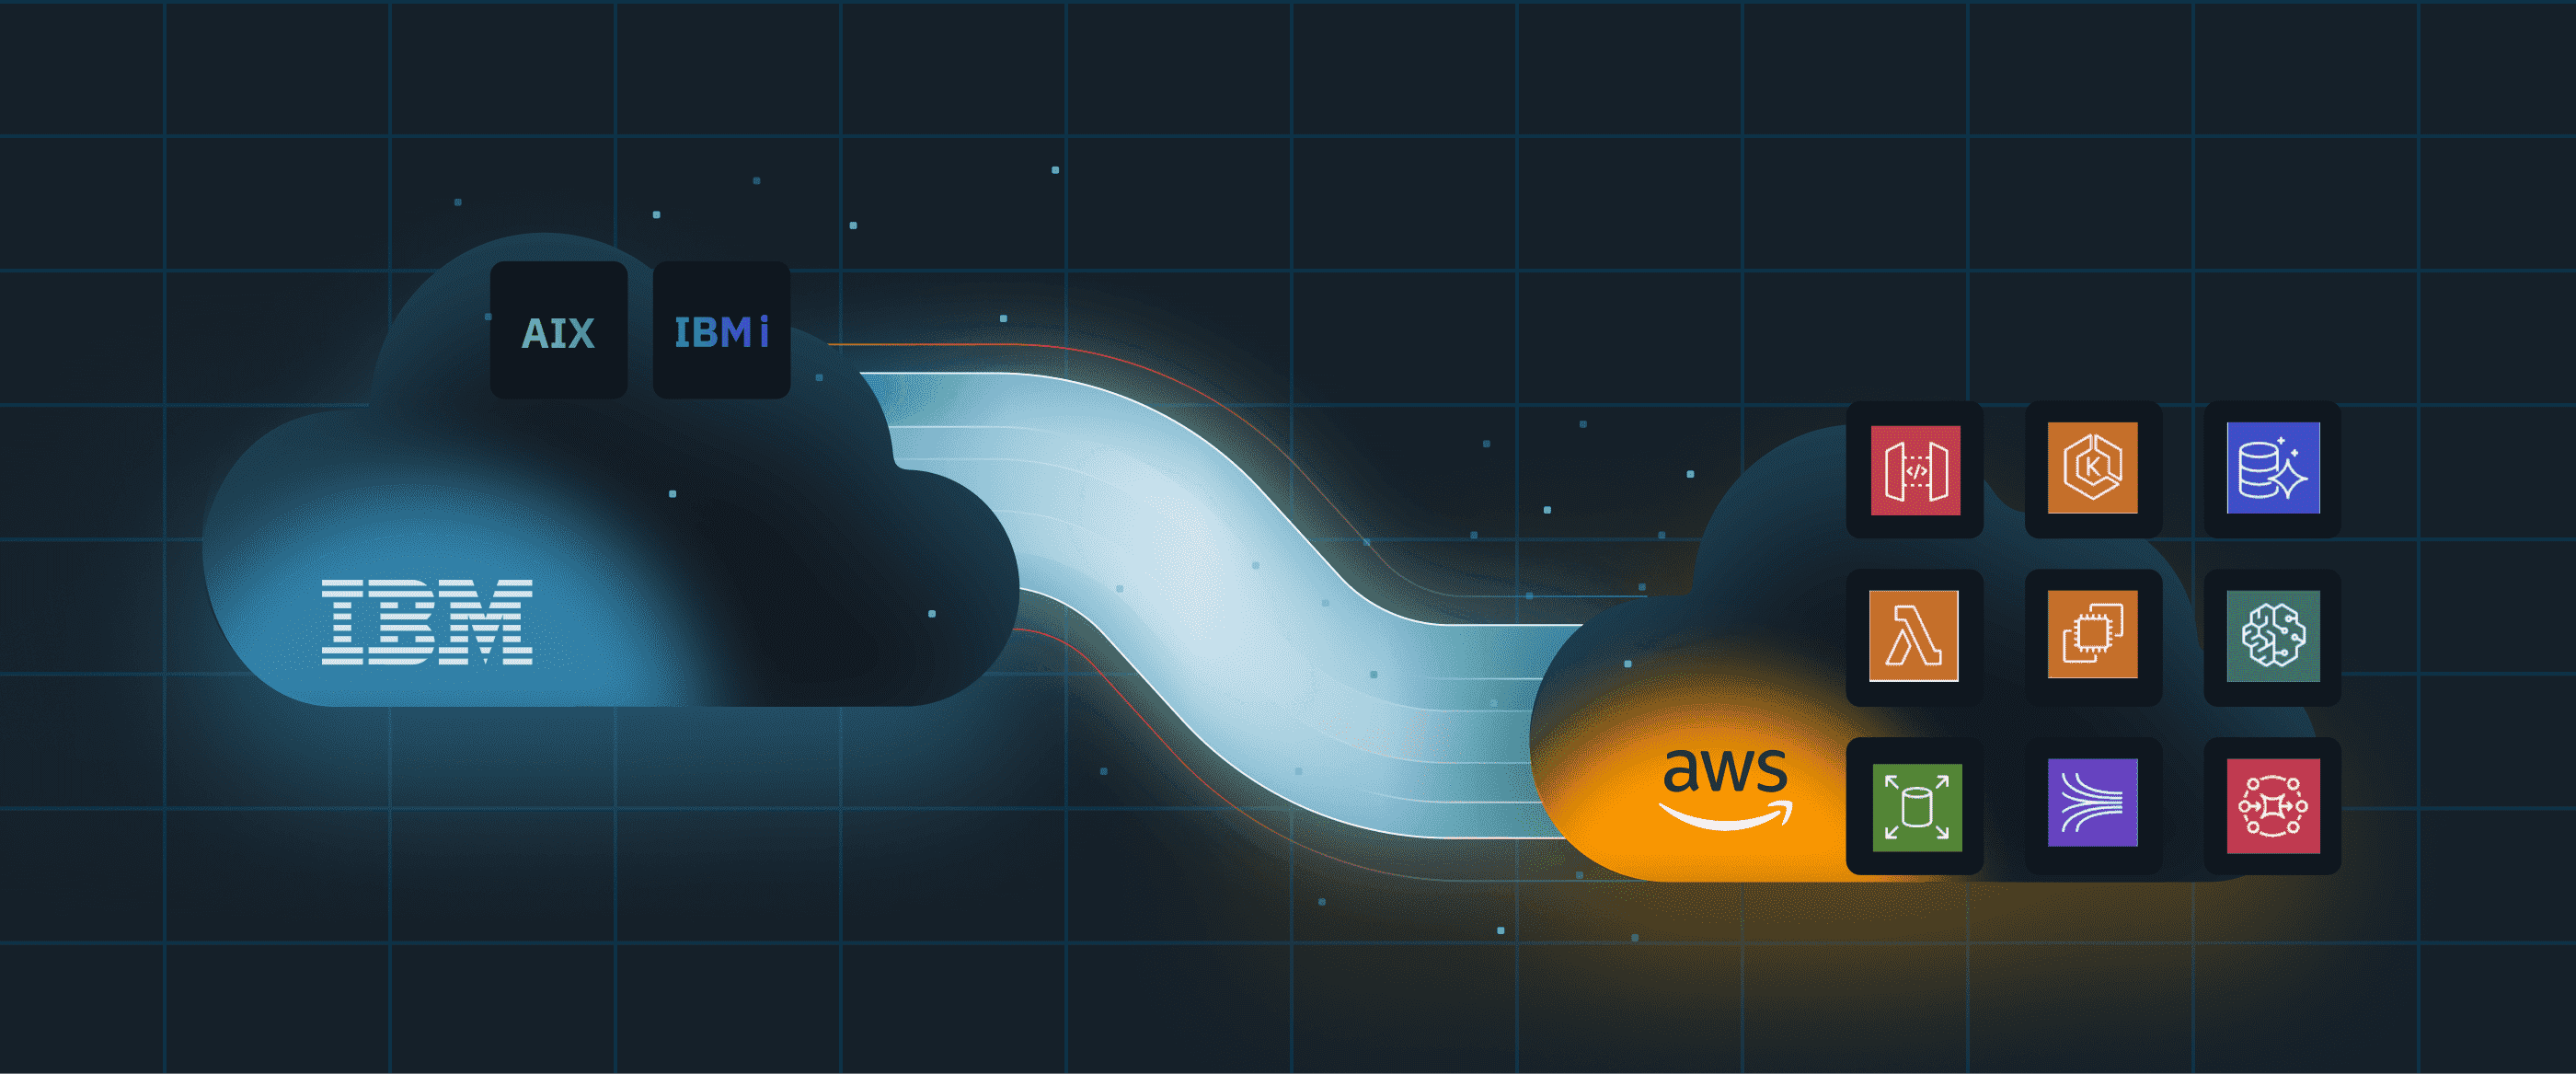 Cloud illustration on the Connectria's new branded website